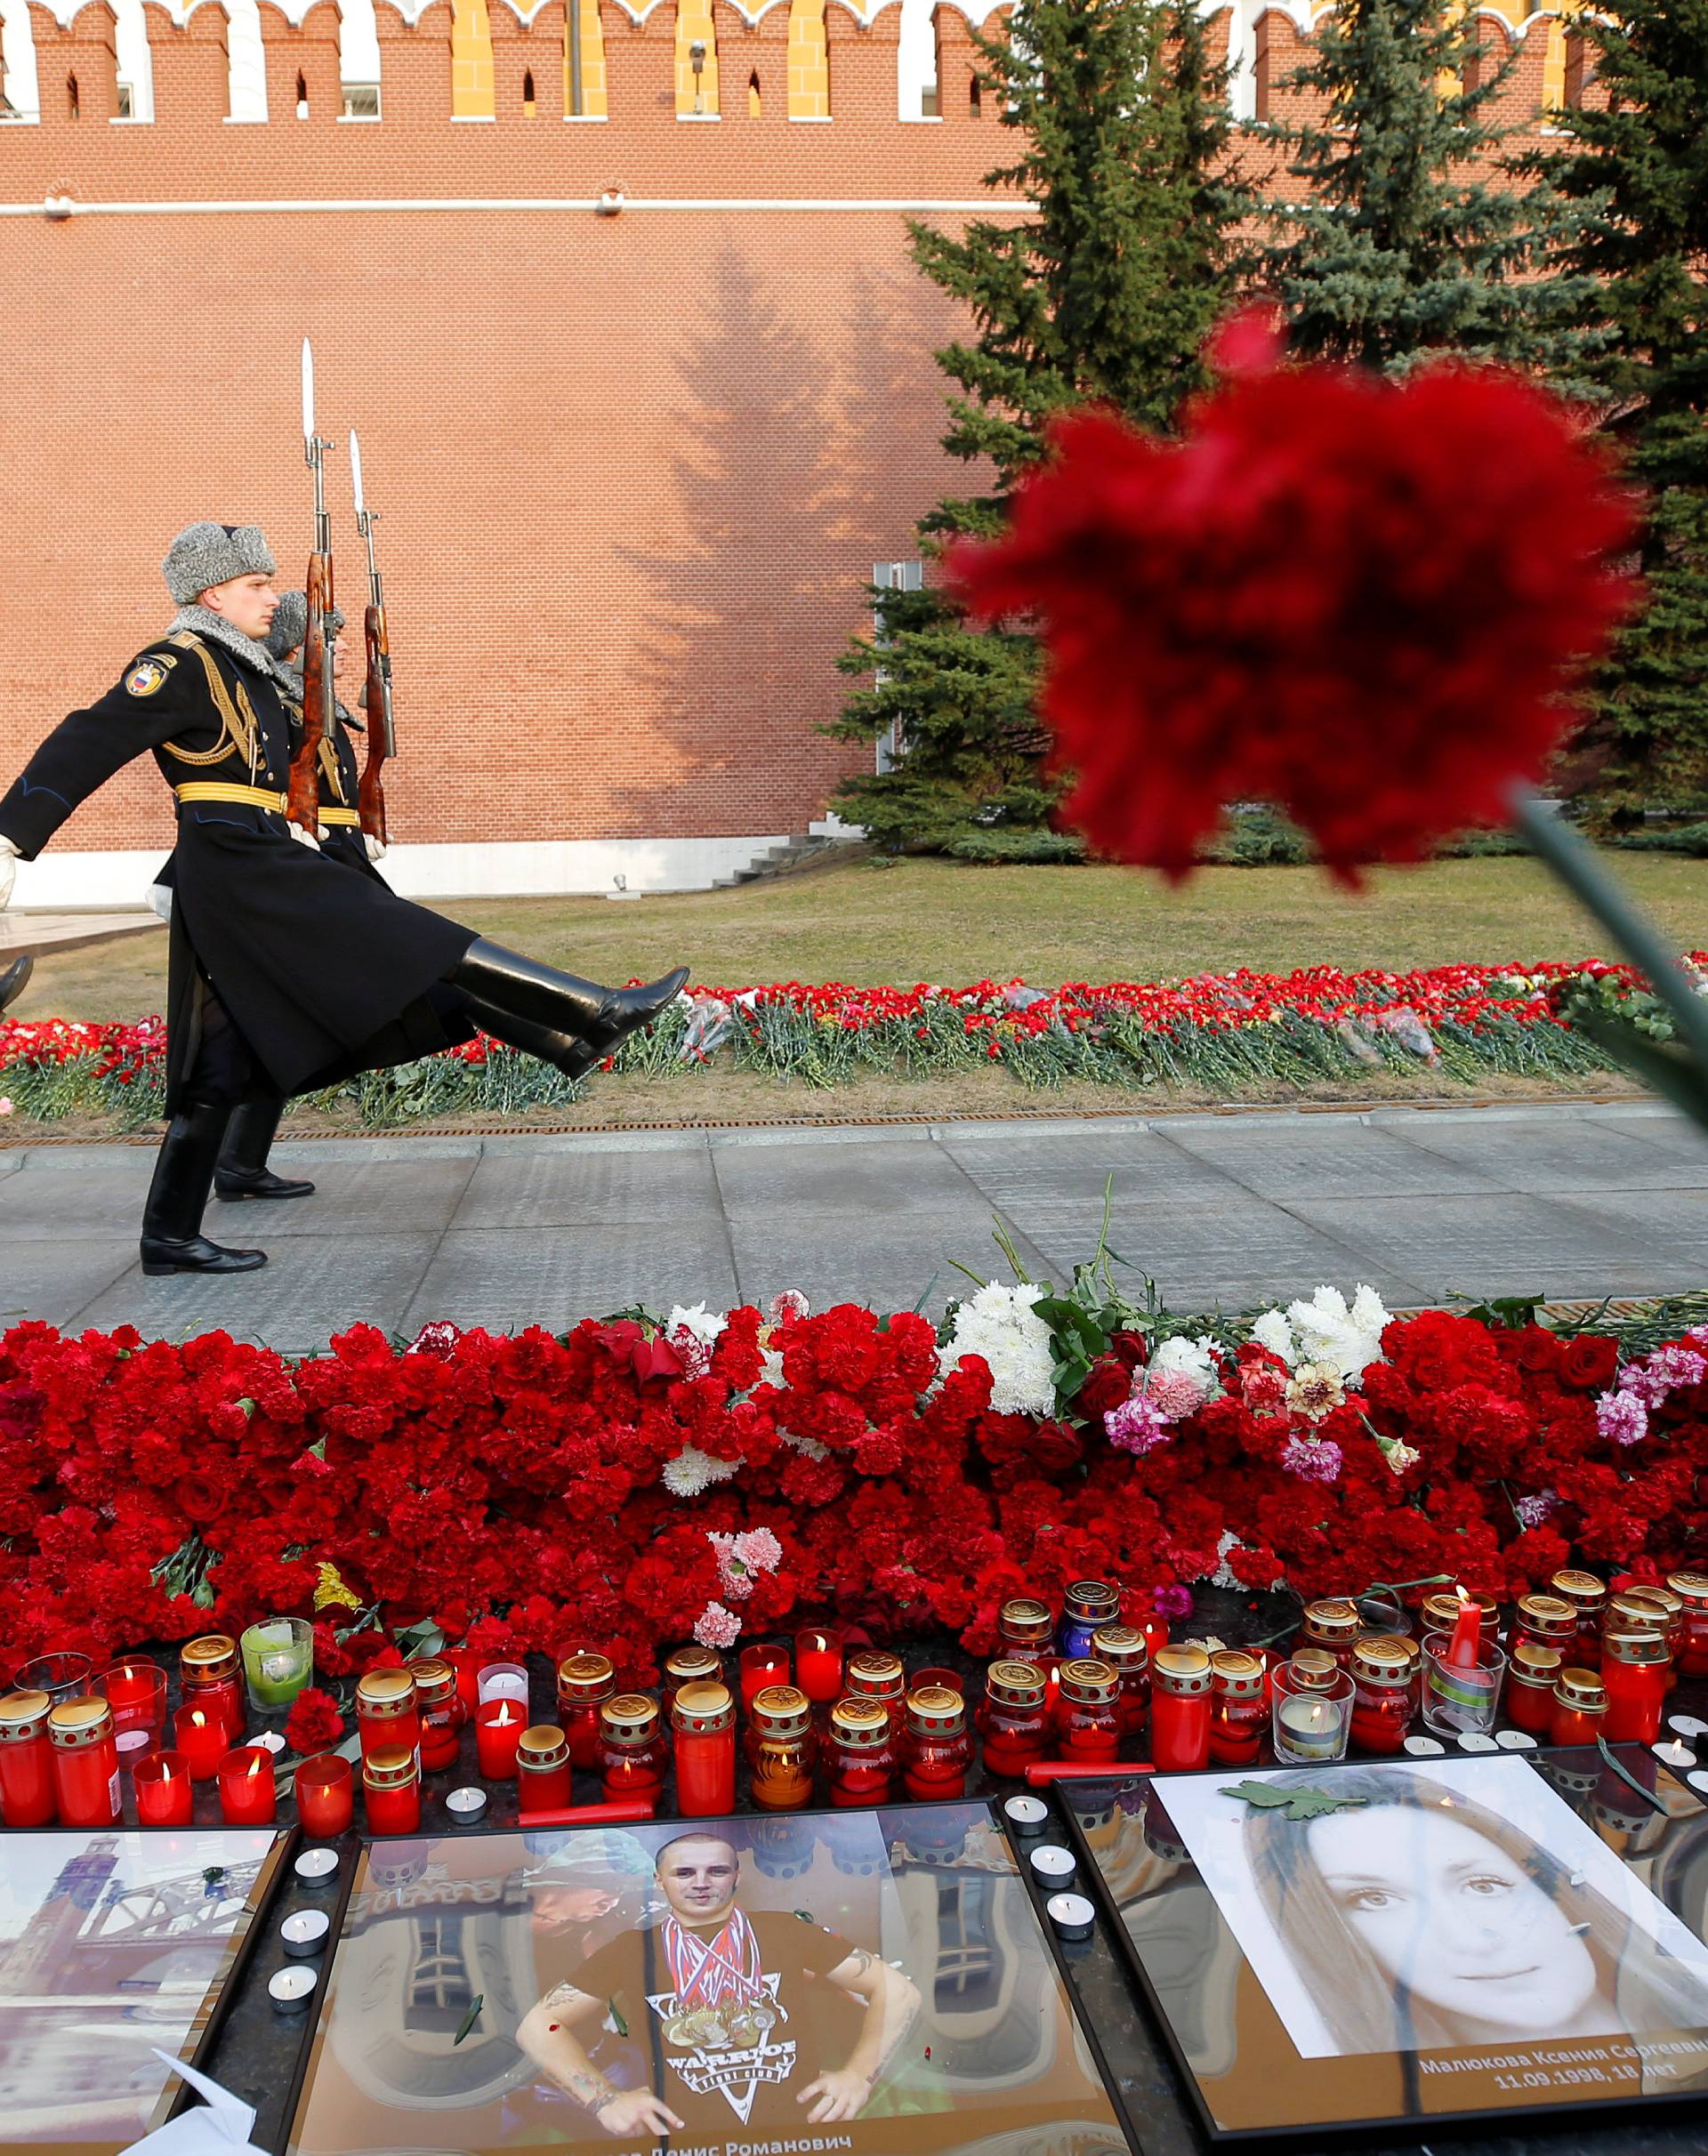 Members of the honour guard march by the Kremlin wall during a memorial commemorating the victims of the St. Petersburg metro blast in Moscow